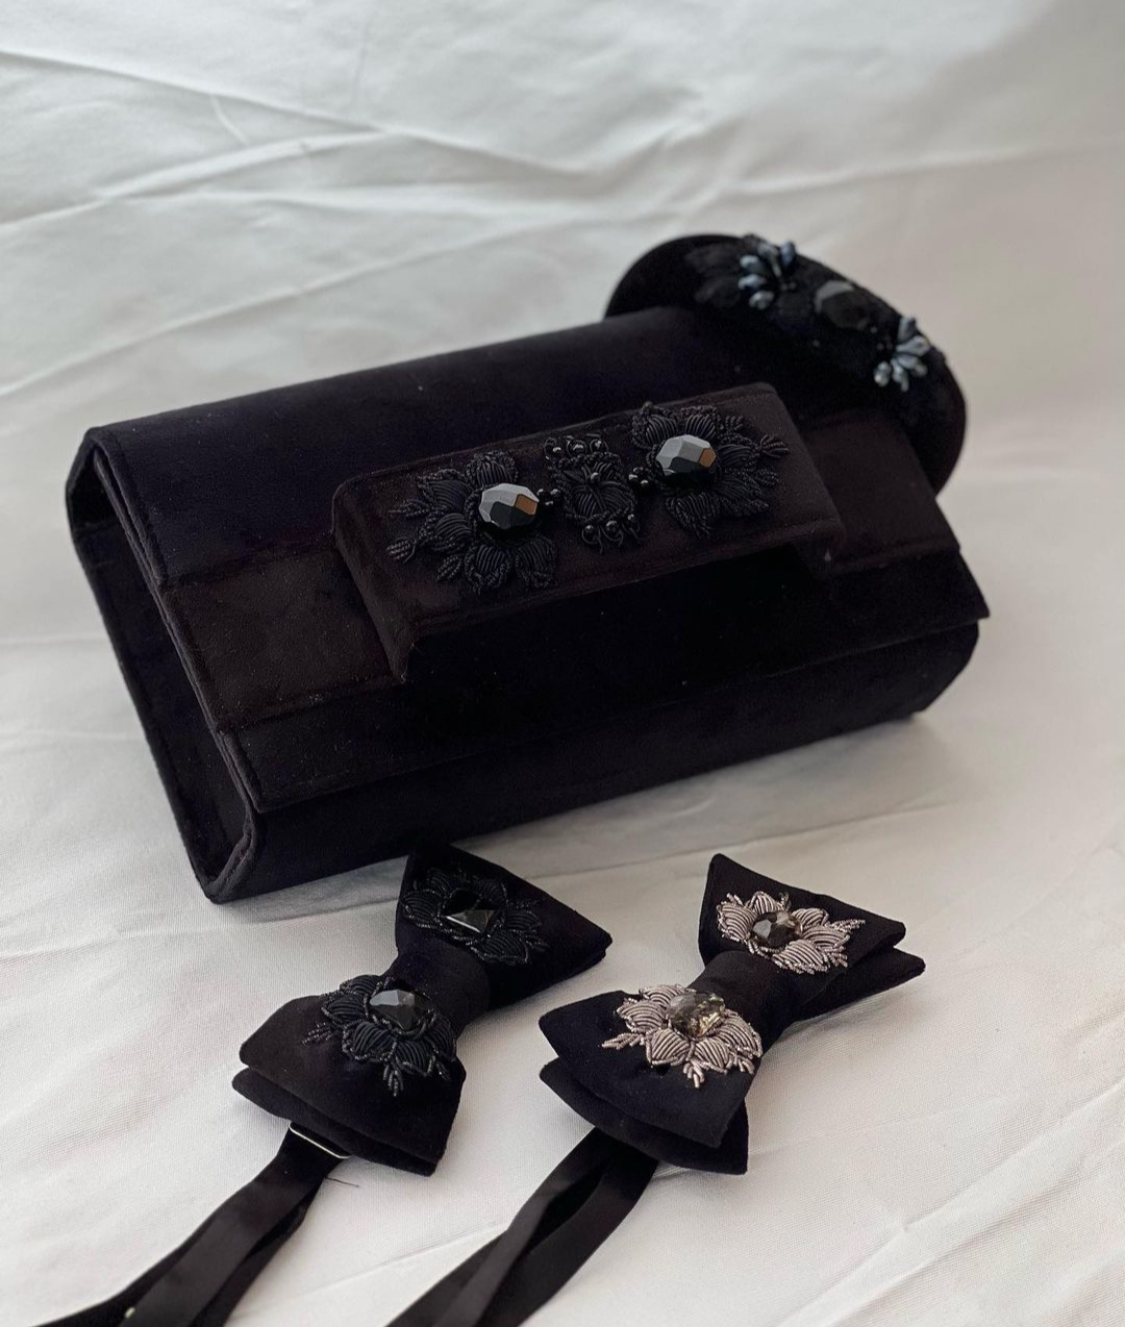 Black velvet clutch with embroidery and beads.